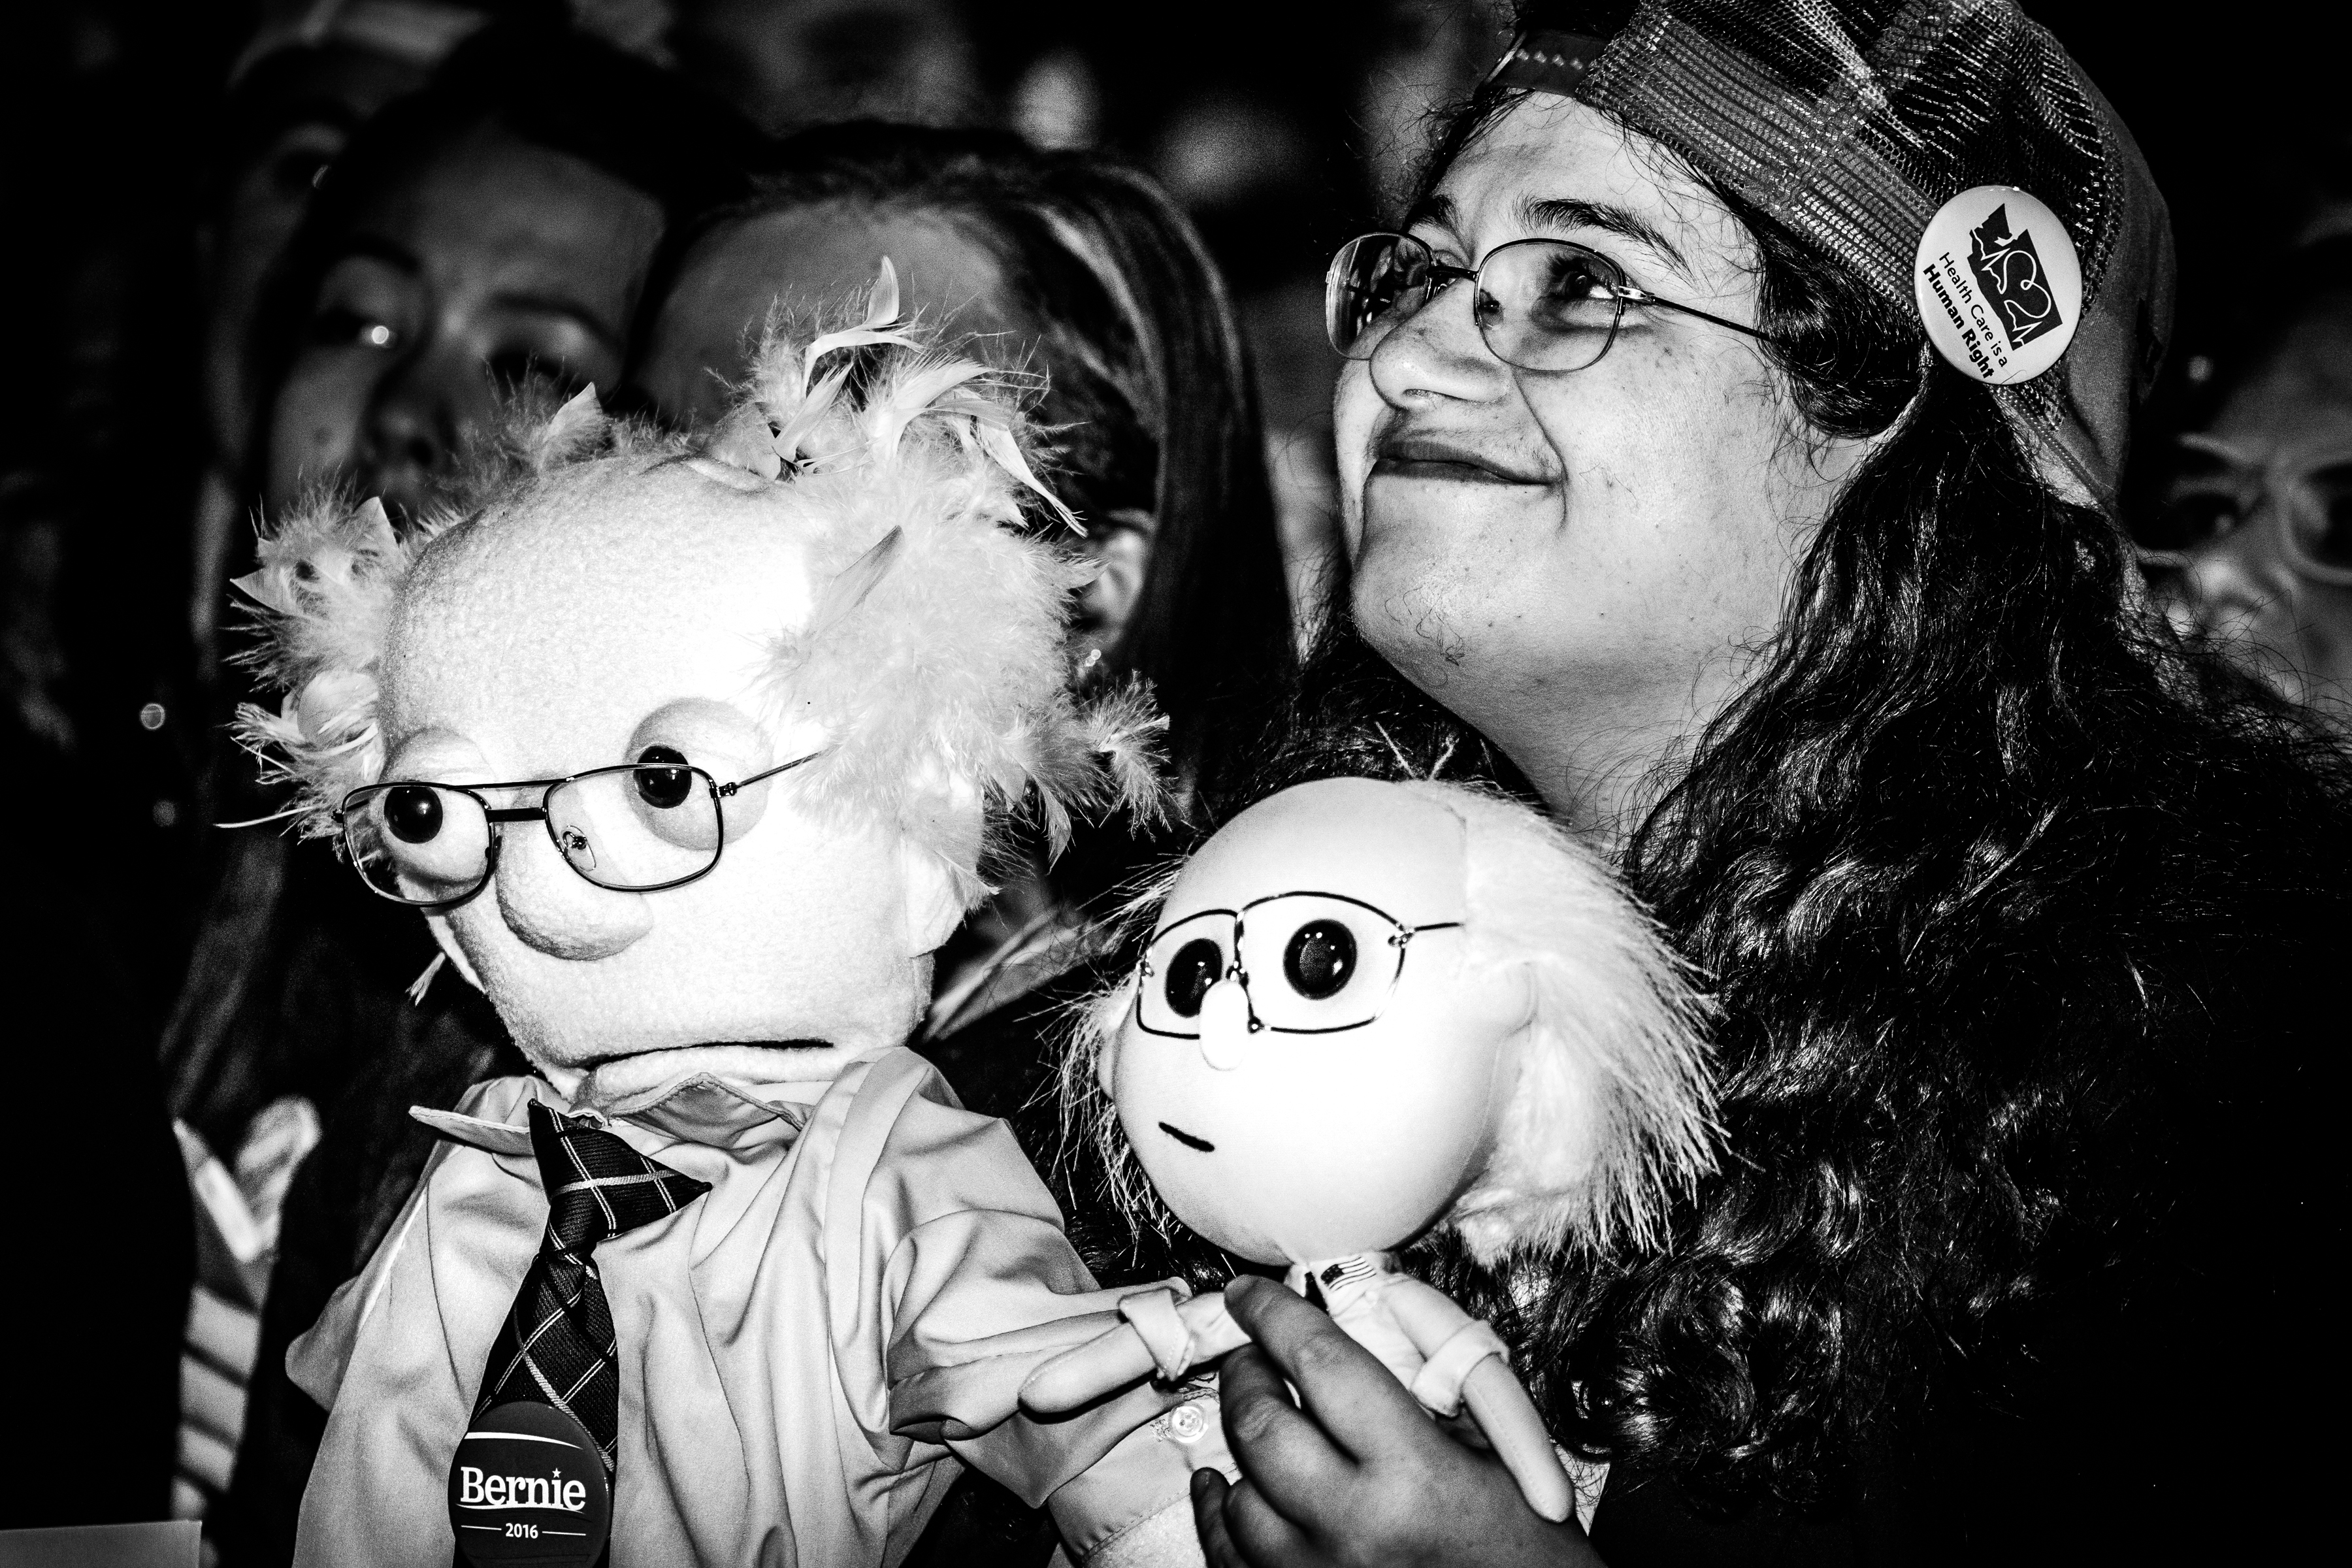 Leslie A. Zukor with her Bernie doll and puppet